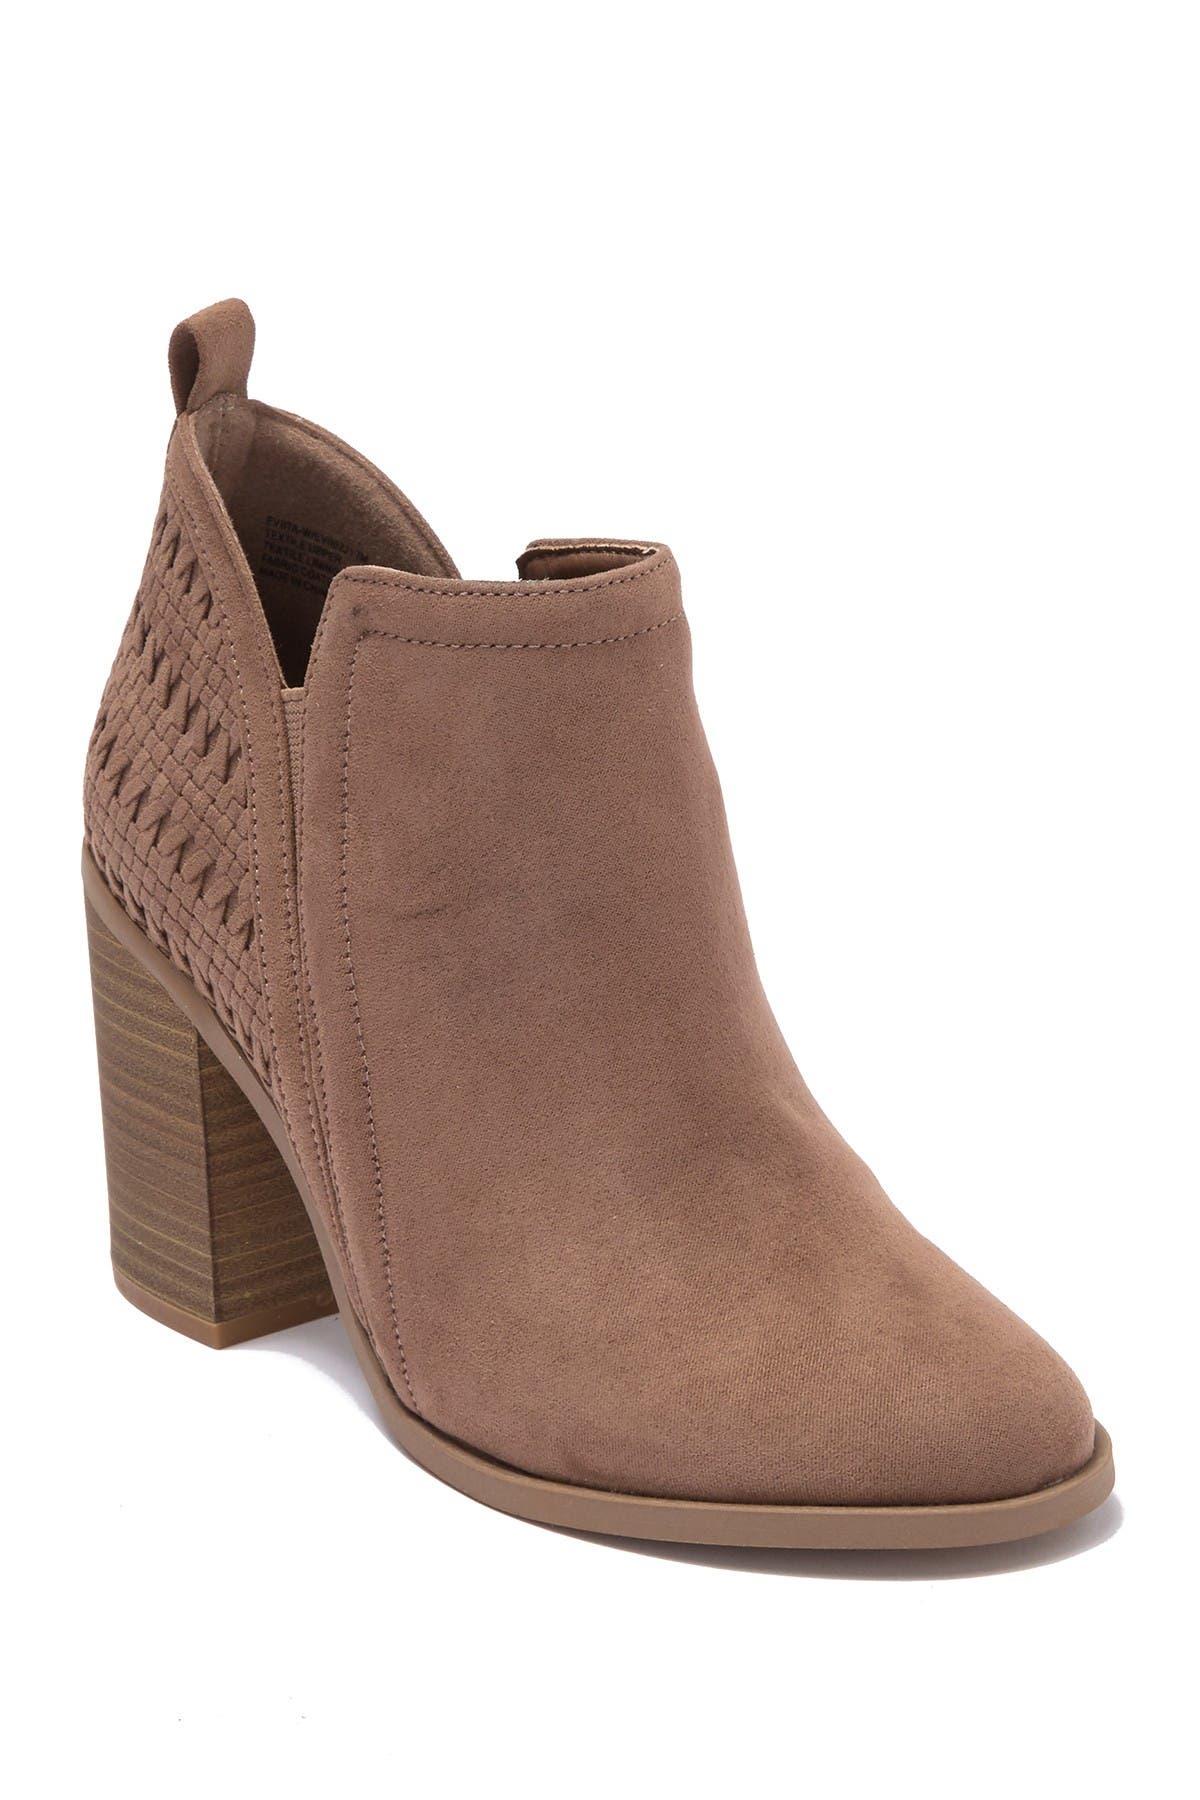 madden girl ankle boots